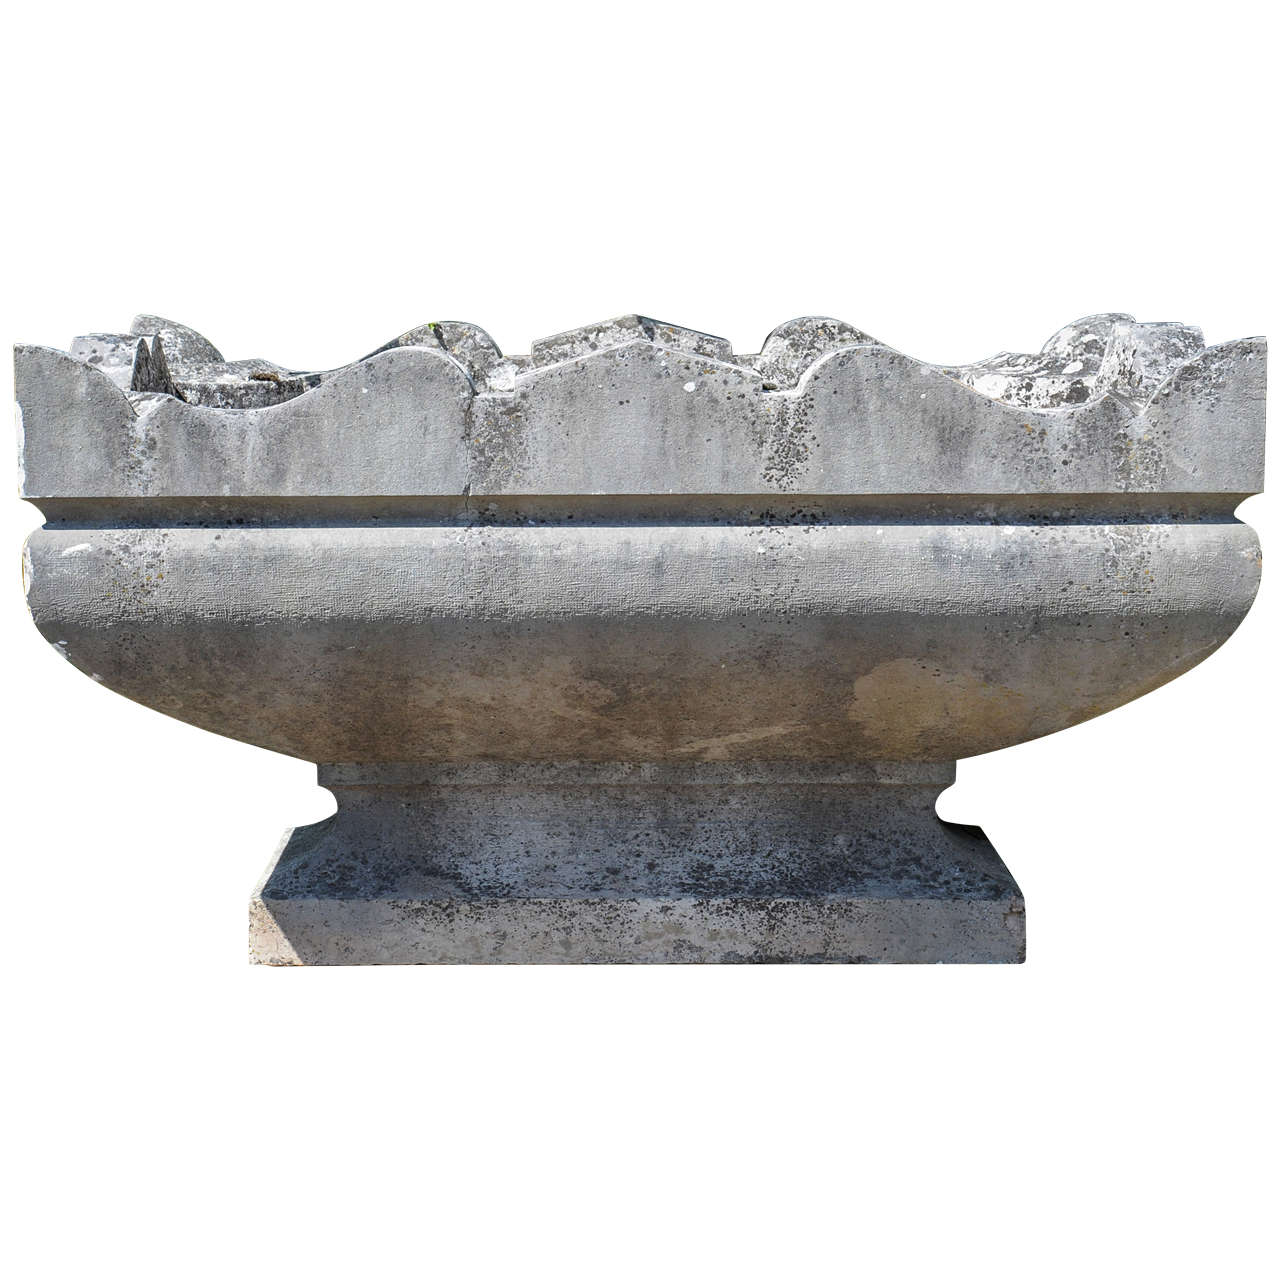 Early 20th Century French Neoclassical Planter